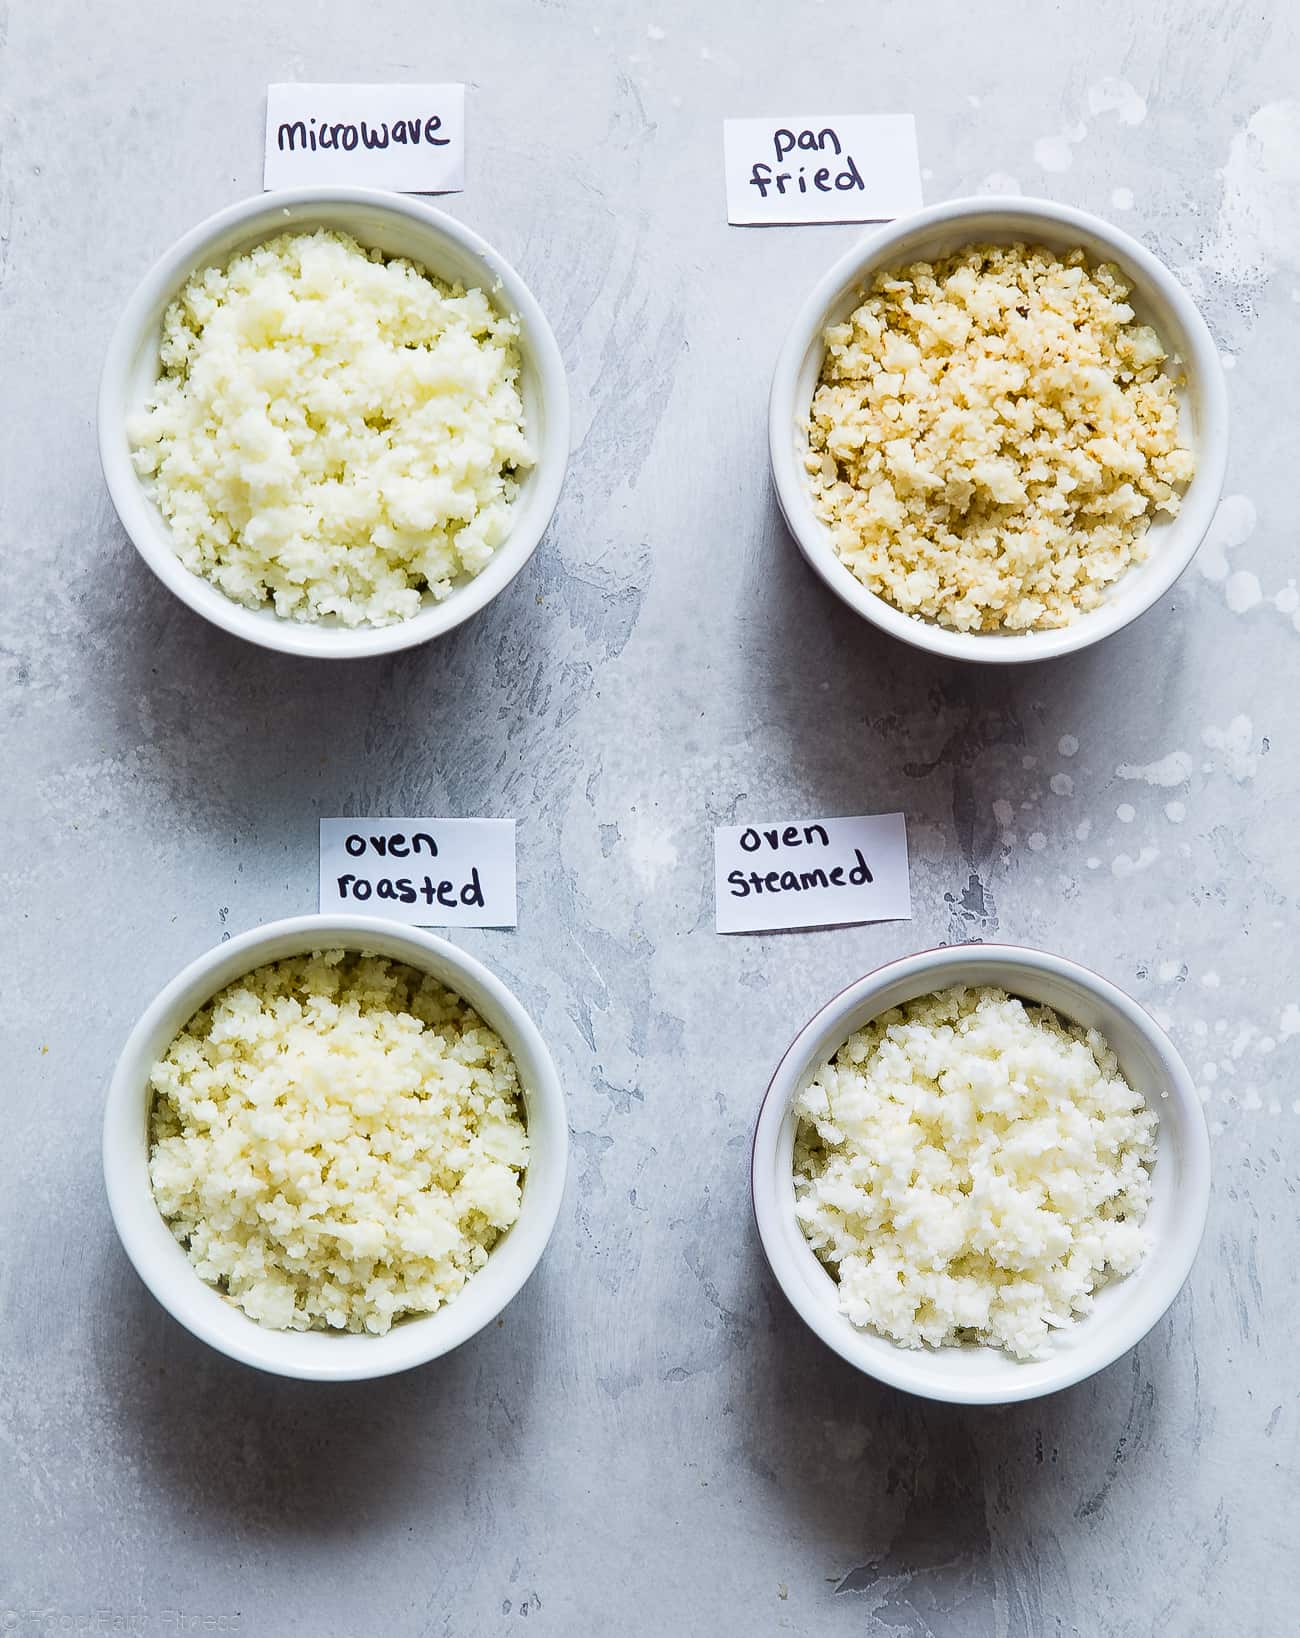 4 Easy Ways to Cook Cauliflower Rice - Ever wondered how to cook cauliflower rice without a microwave? Here are 4 simple and healthy ways to cook cauliflower rice! | #Foodfaithfitness | #Glutenfree #Keto #Lowcarb #healthy #cauliflower